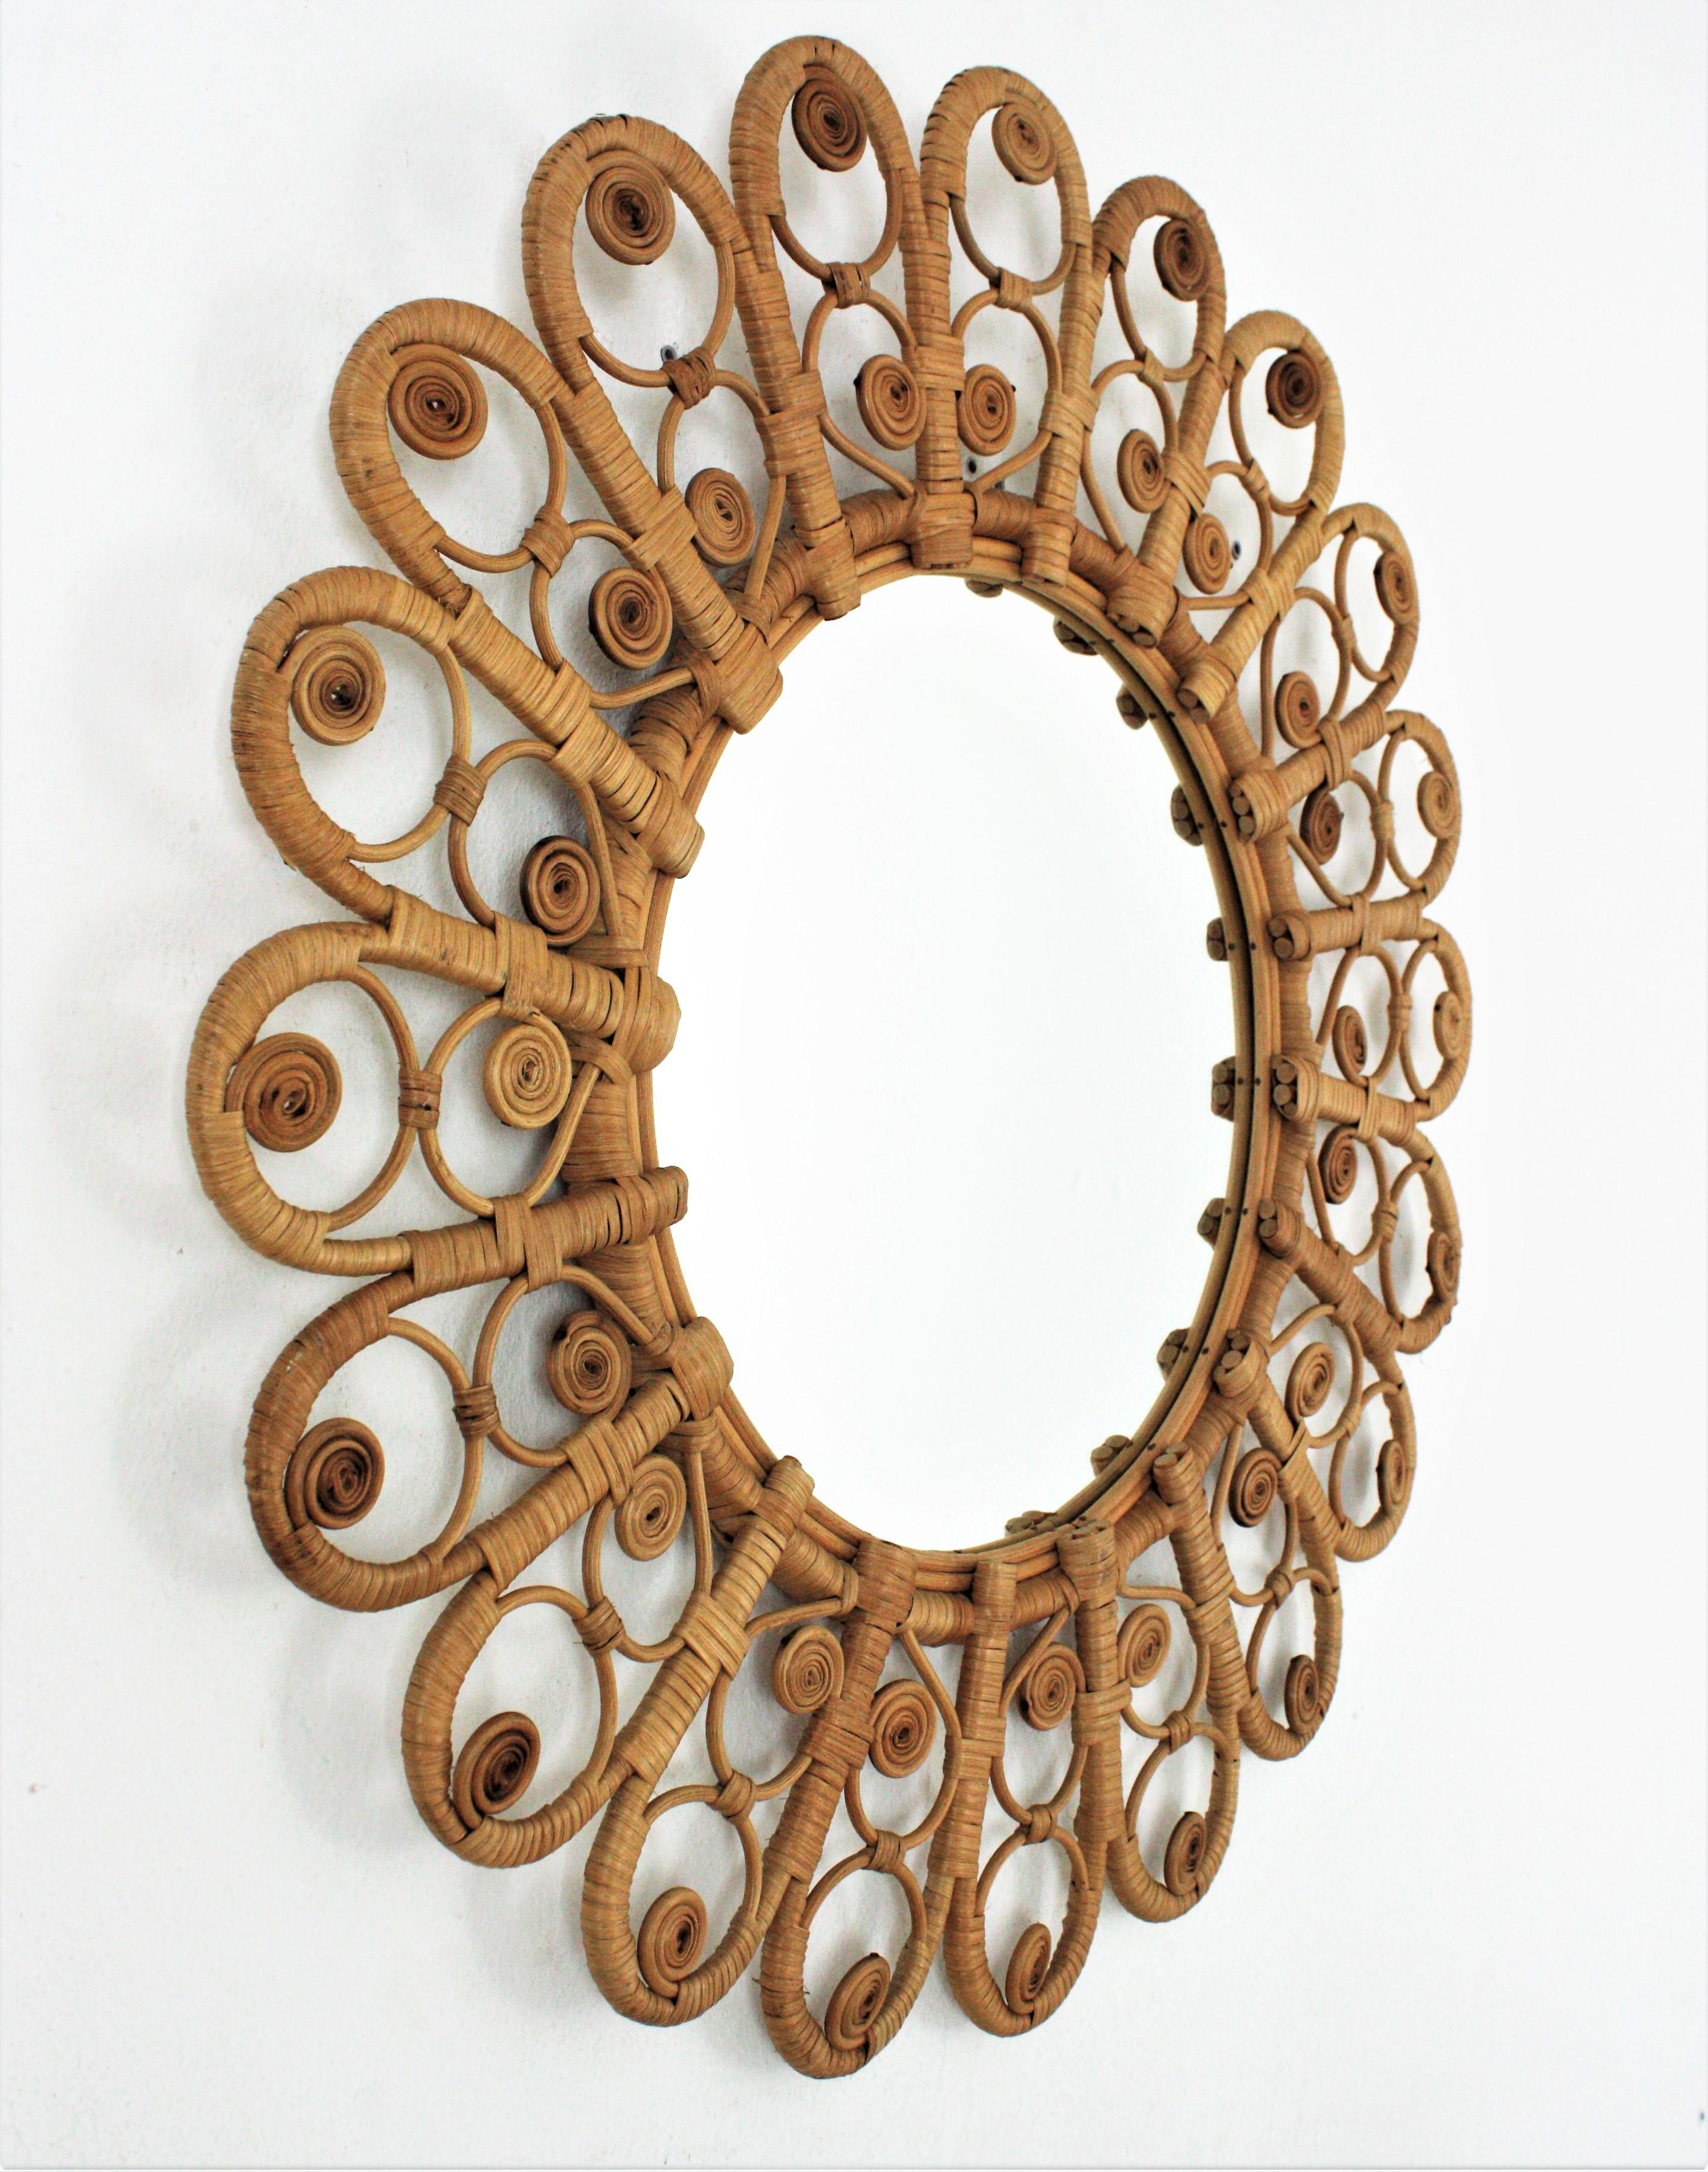 Hand-Crafted Rattan Sunburst Mirror with Filigree Peacock Frame, Spain, 1960s For Sale